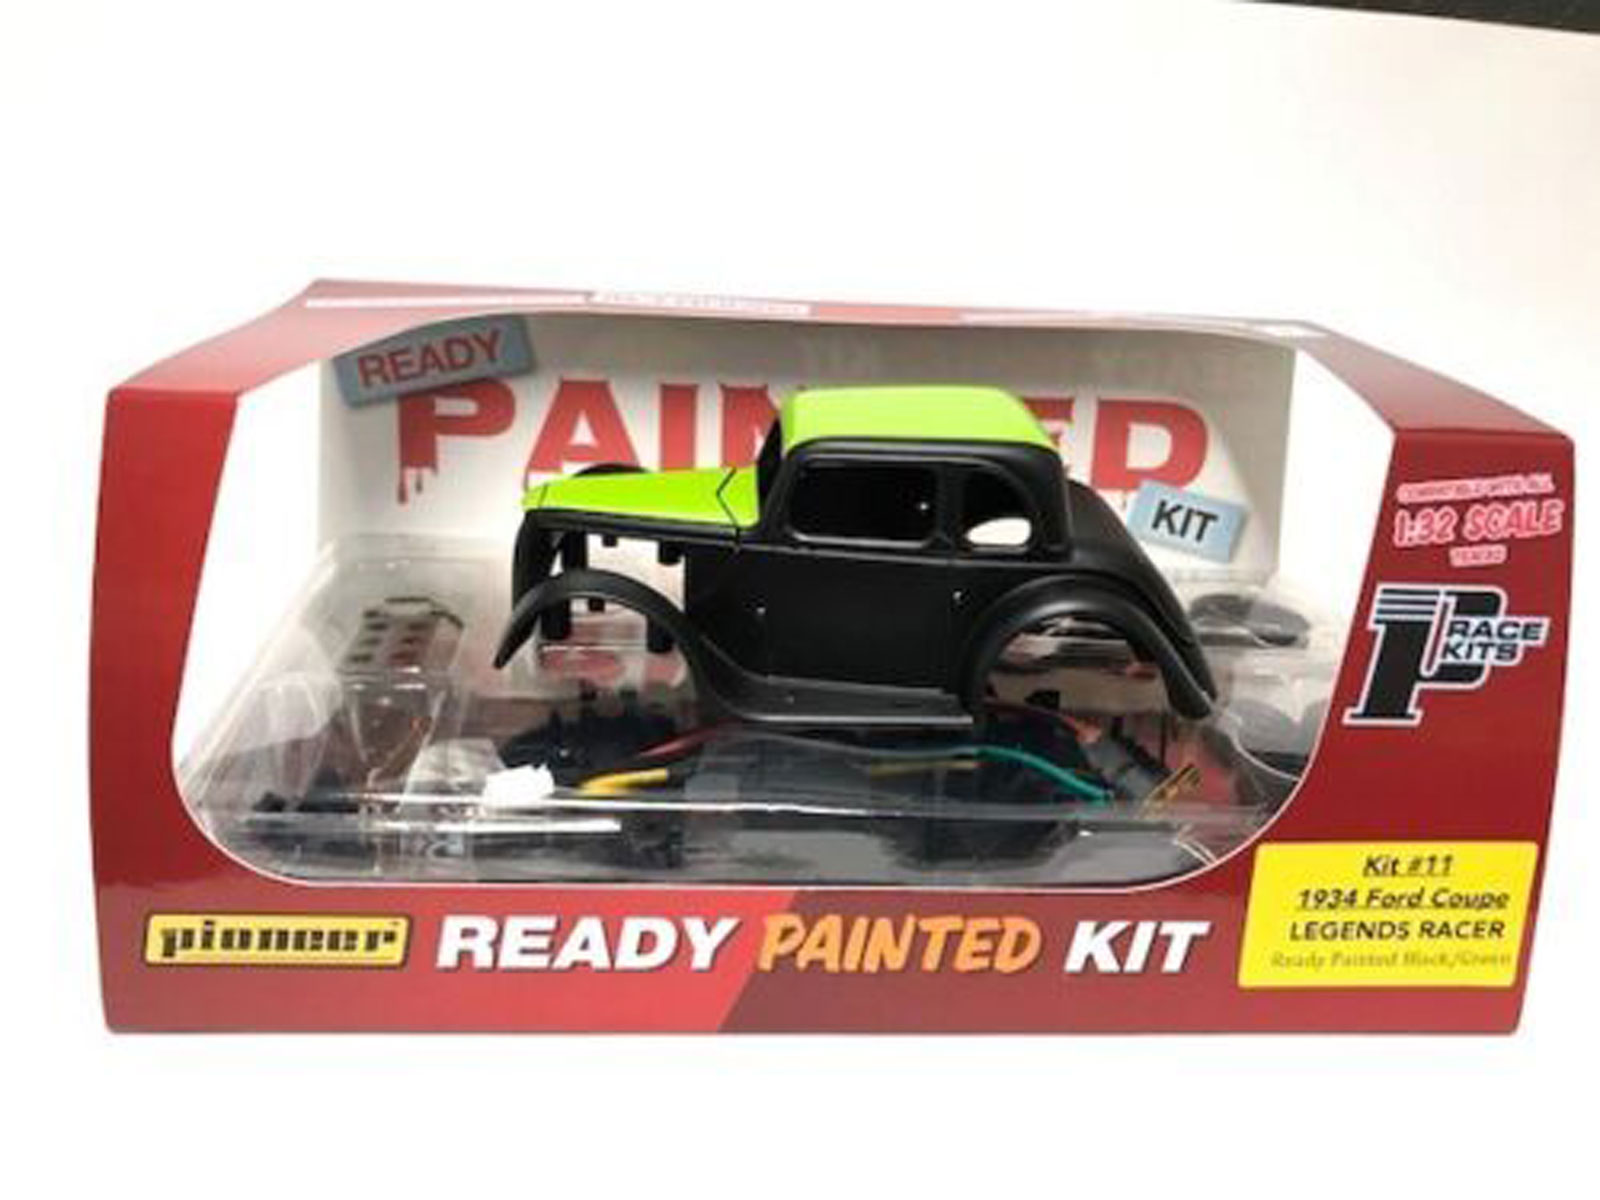 NEW Pioneer P083 Legends Racer 34 Coupe Smokey Slot Car 1/32 DPR FREE US SHIP 